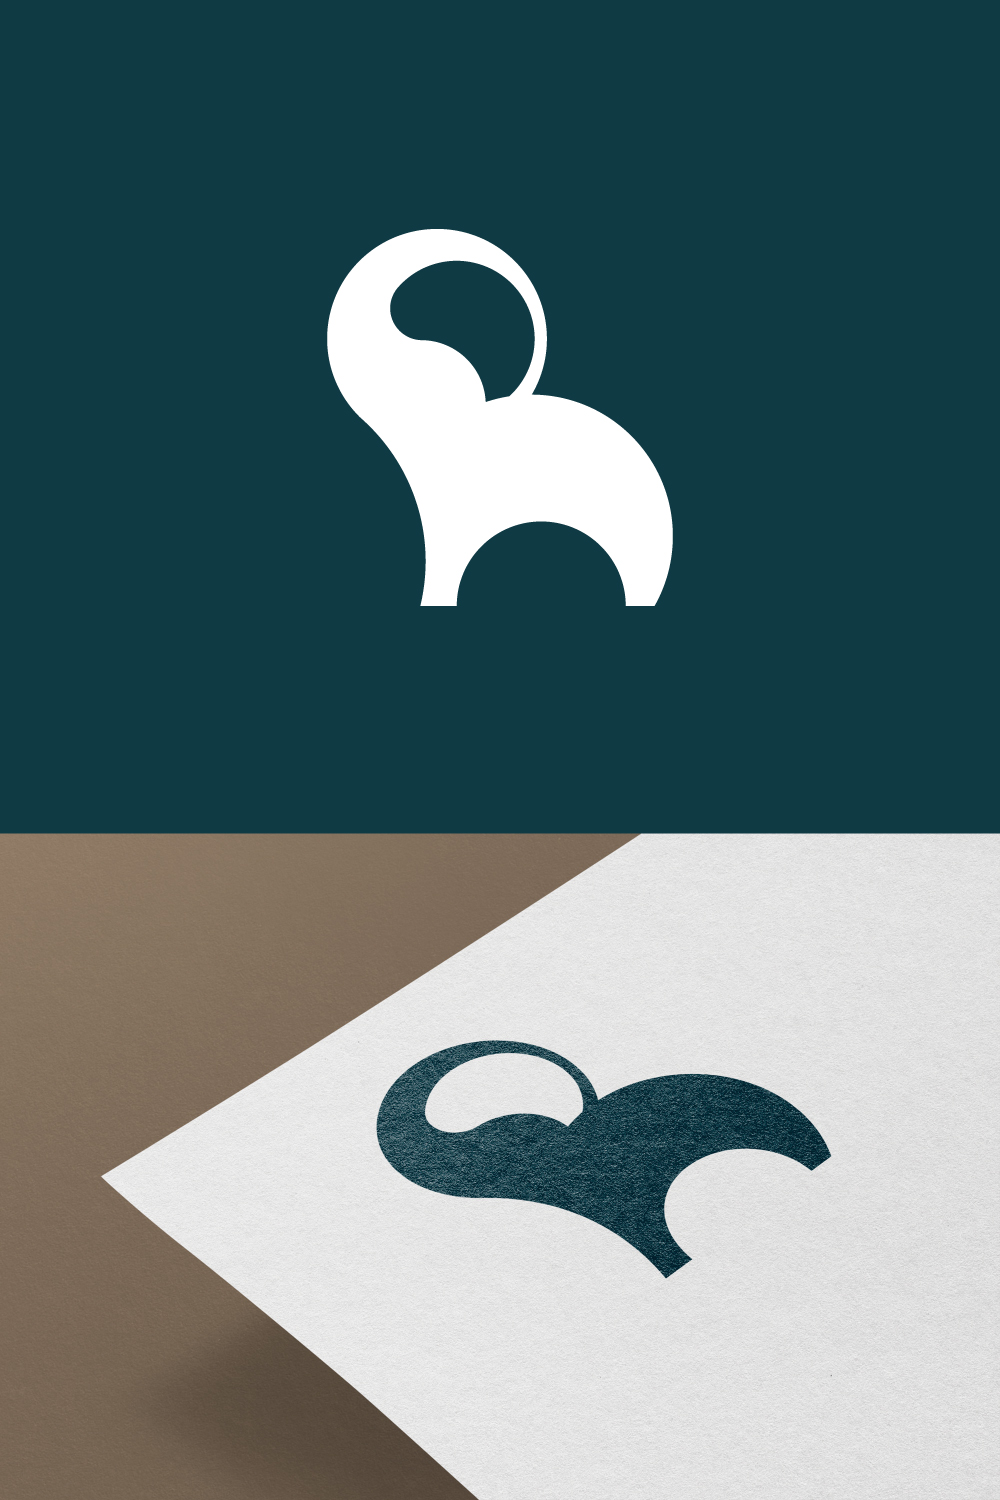 Elephant Logo Template just for 5$ pinterest preview image.